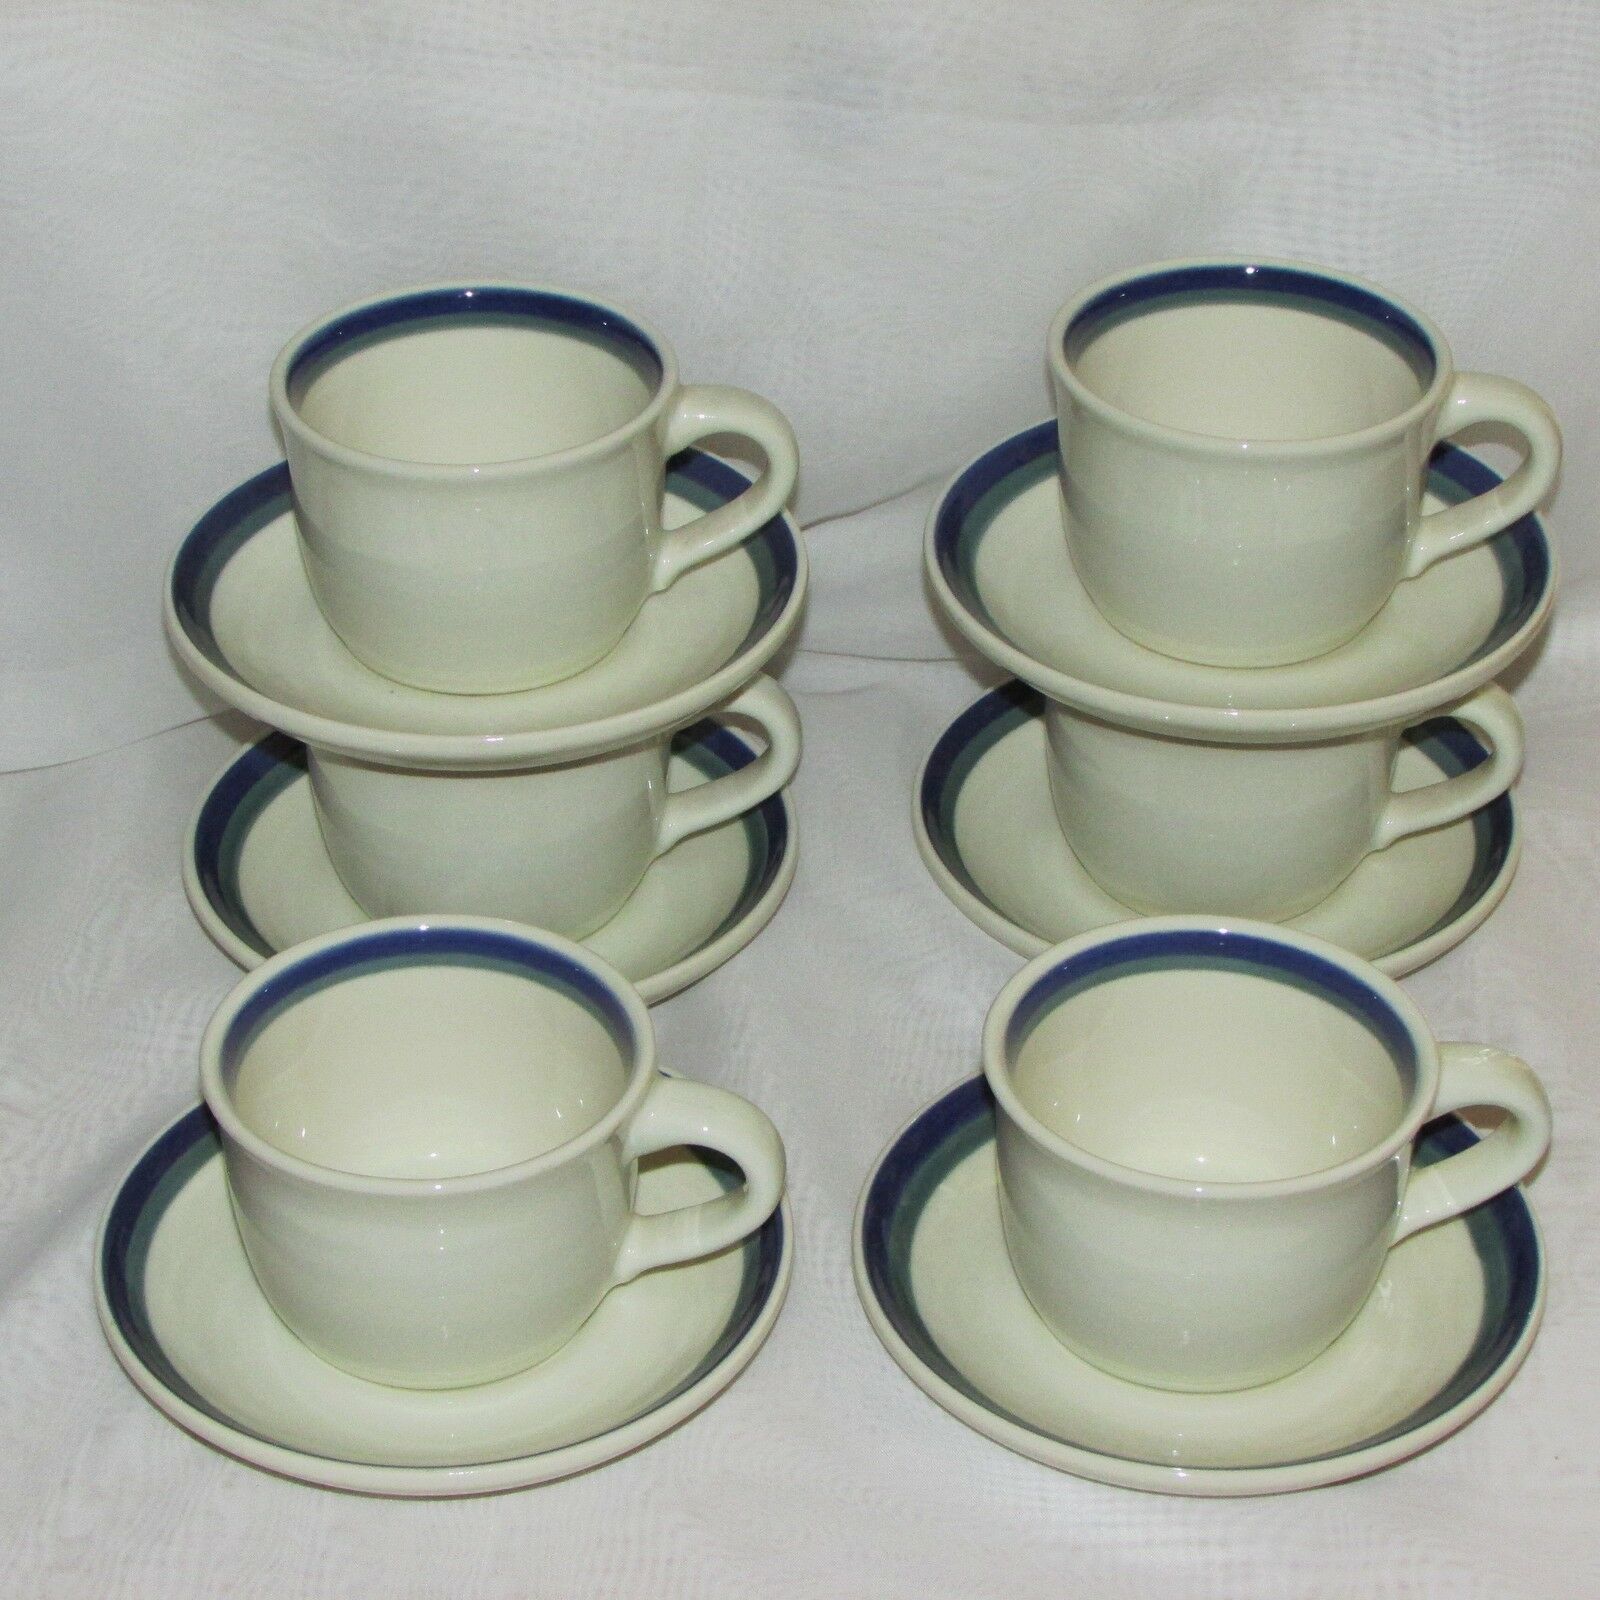 PFALTZGRAFF NORTHWINDS COFFEE CUP & SAUCER LOT 6 STONEWARE BLUE GREEN BANDS TEA - $24.99